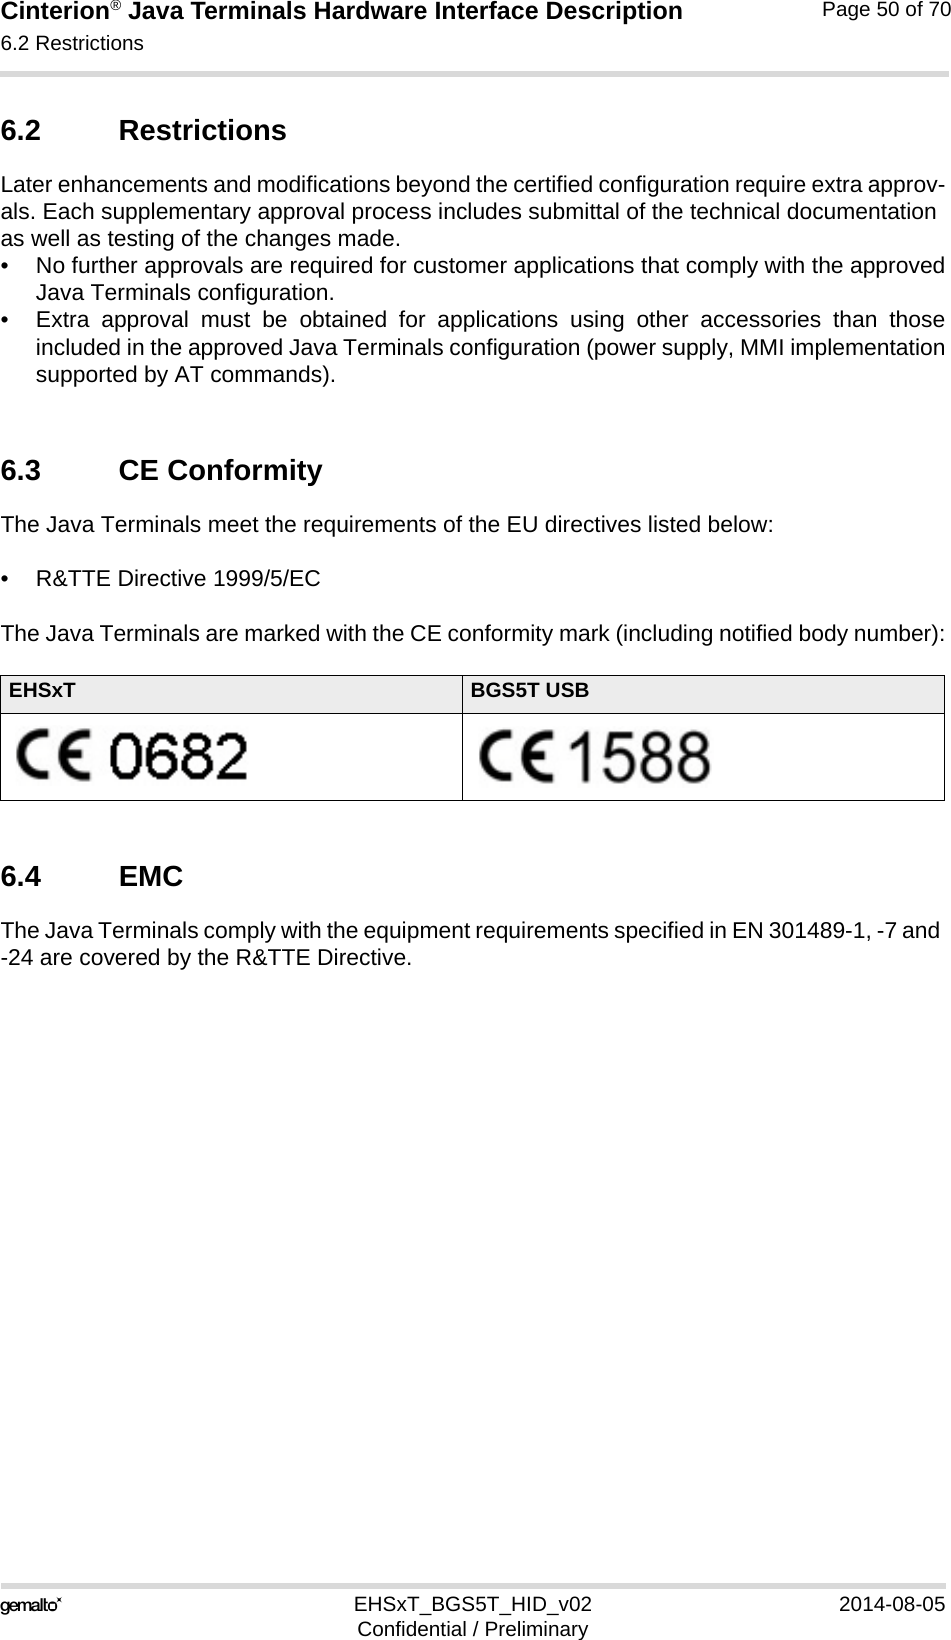 Cinterion® Java Terminals Hardware Interface Description6.2 Restrictions52EHSxT_BGS5T_HID_v02 2014-08-05Confidential / PreliminaryPage 50 of 706.2 RestrictionsLater enhancements and modifications beyond the certified configuration require extra approv-als. Each supplementary approval process includes submittal of the technical documentation as well as testing of the changes made. • No further approvals are required for customer applications that comply with the approvedJava Terminals configuration. • Extra approval must be obtained for applications using other accessories than thoseincluded in the approved Java Terminals configuration (power supply, MMI implementationsupported by AT commands). 6.3 CE ConformityThe Java Terminals meet the requirements of the EU directives listed below:• R&amp;TTE Directive 1999/5/EC The Java Terminals are marked with the CE conformity mark (including notified body number):6.4 EMCThe Java Terminals comply with the equipment requirements specified in EN 301489-1, -7 and -24 are covered by the R&amp;TTE Directive.EHSxT BGS5T USB